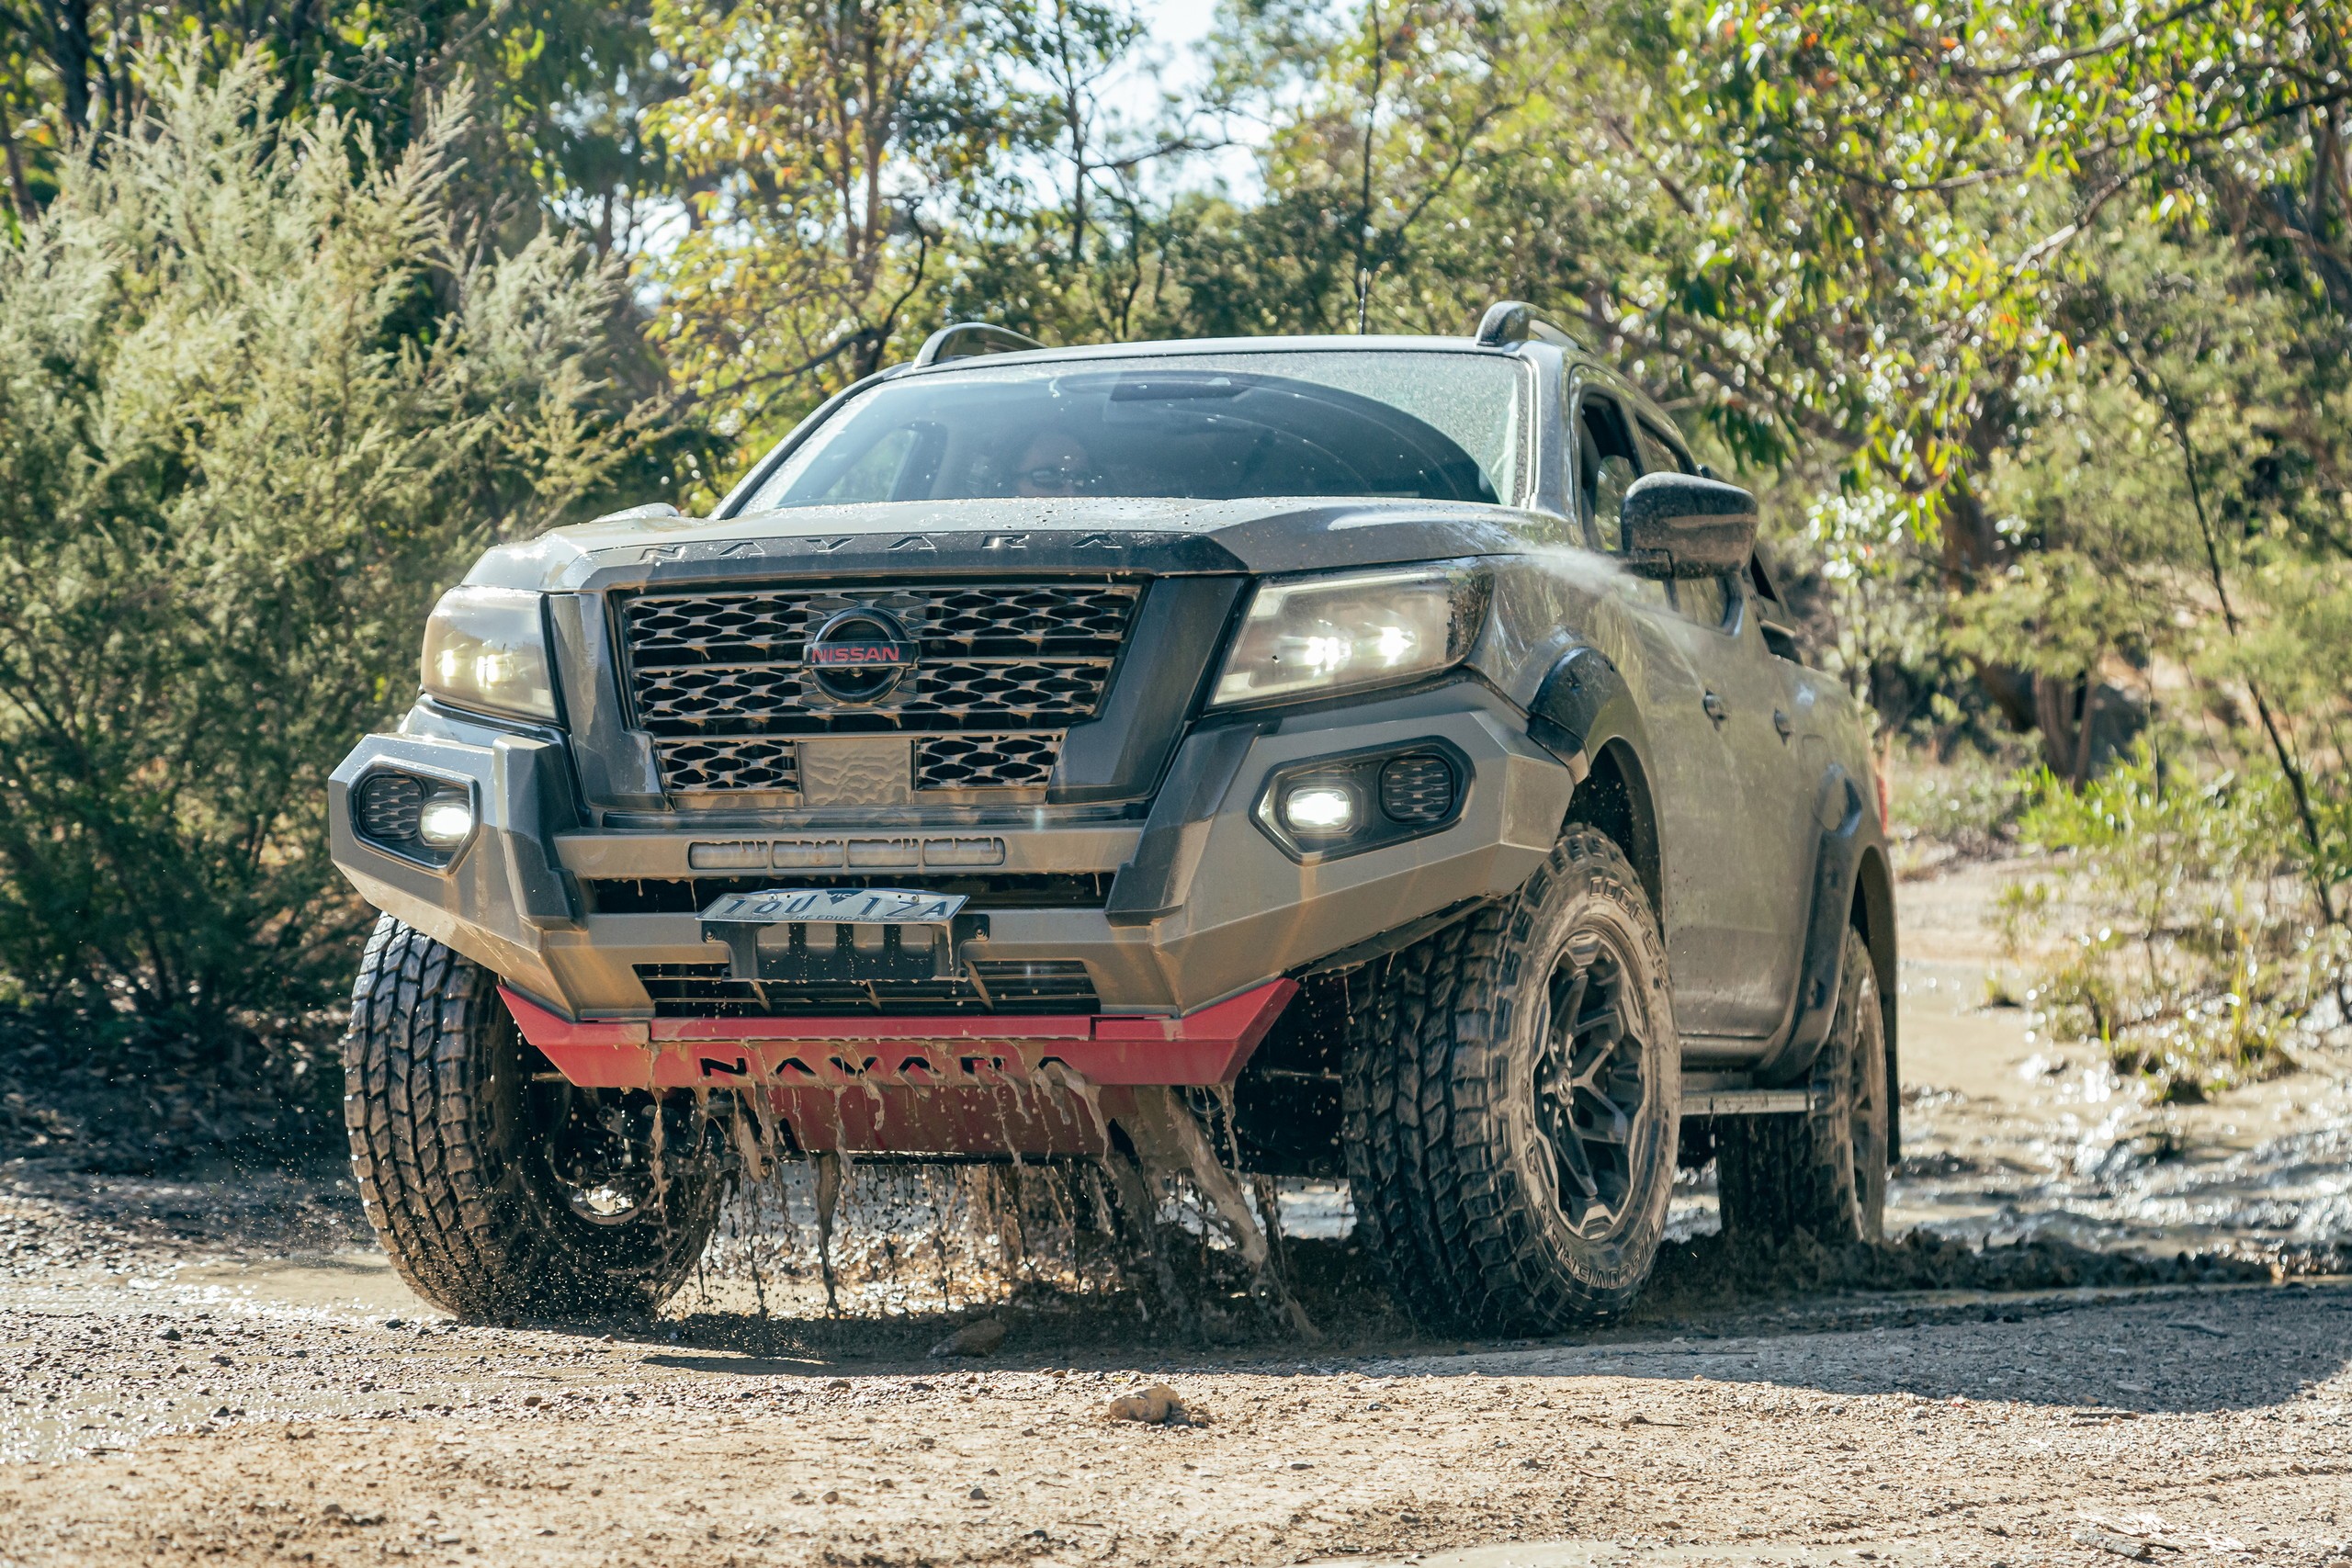 australias nissan navara pro 4x warrior is the frontier you want in the states 5